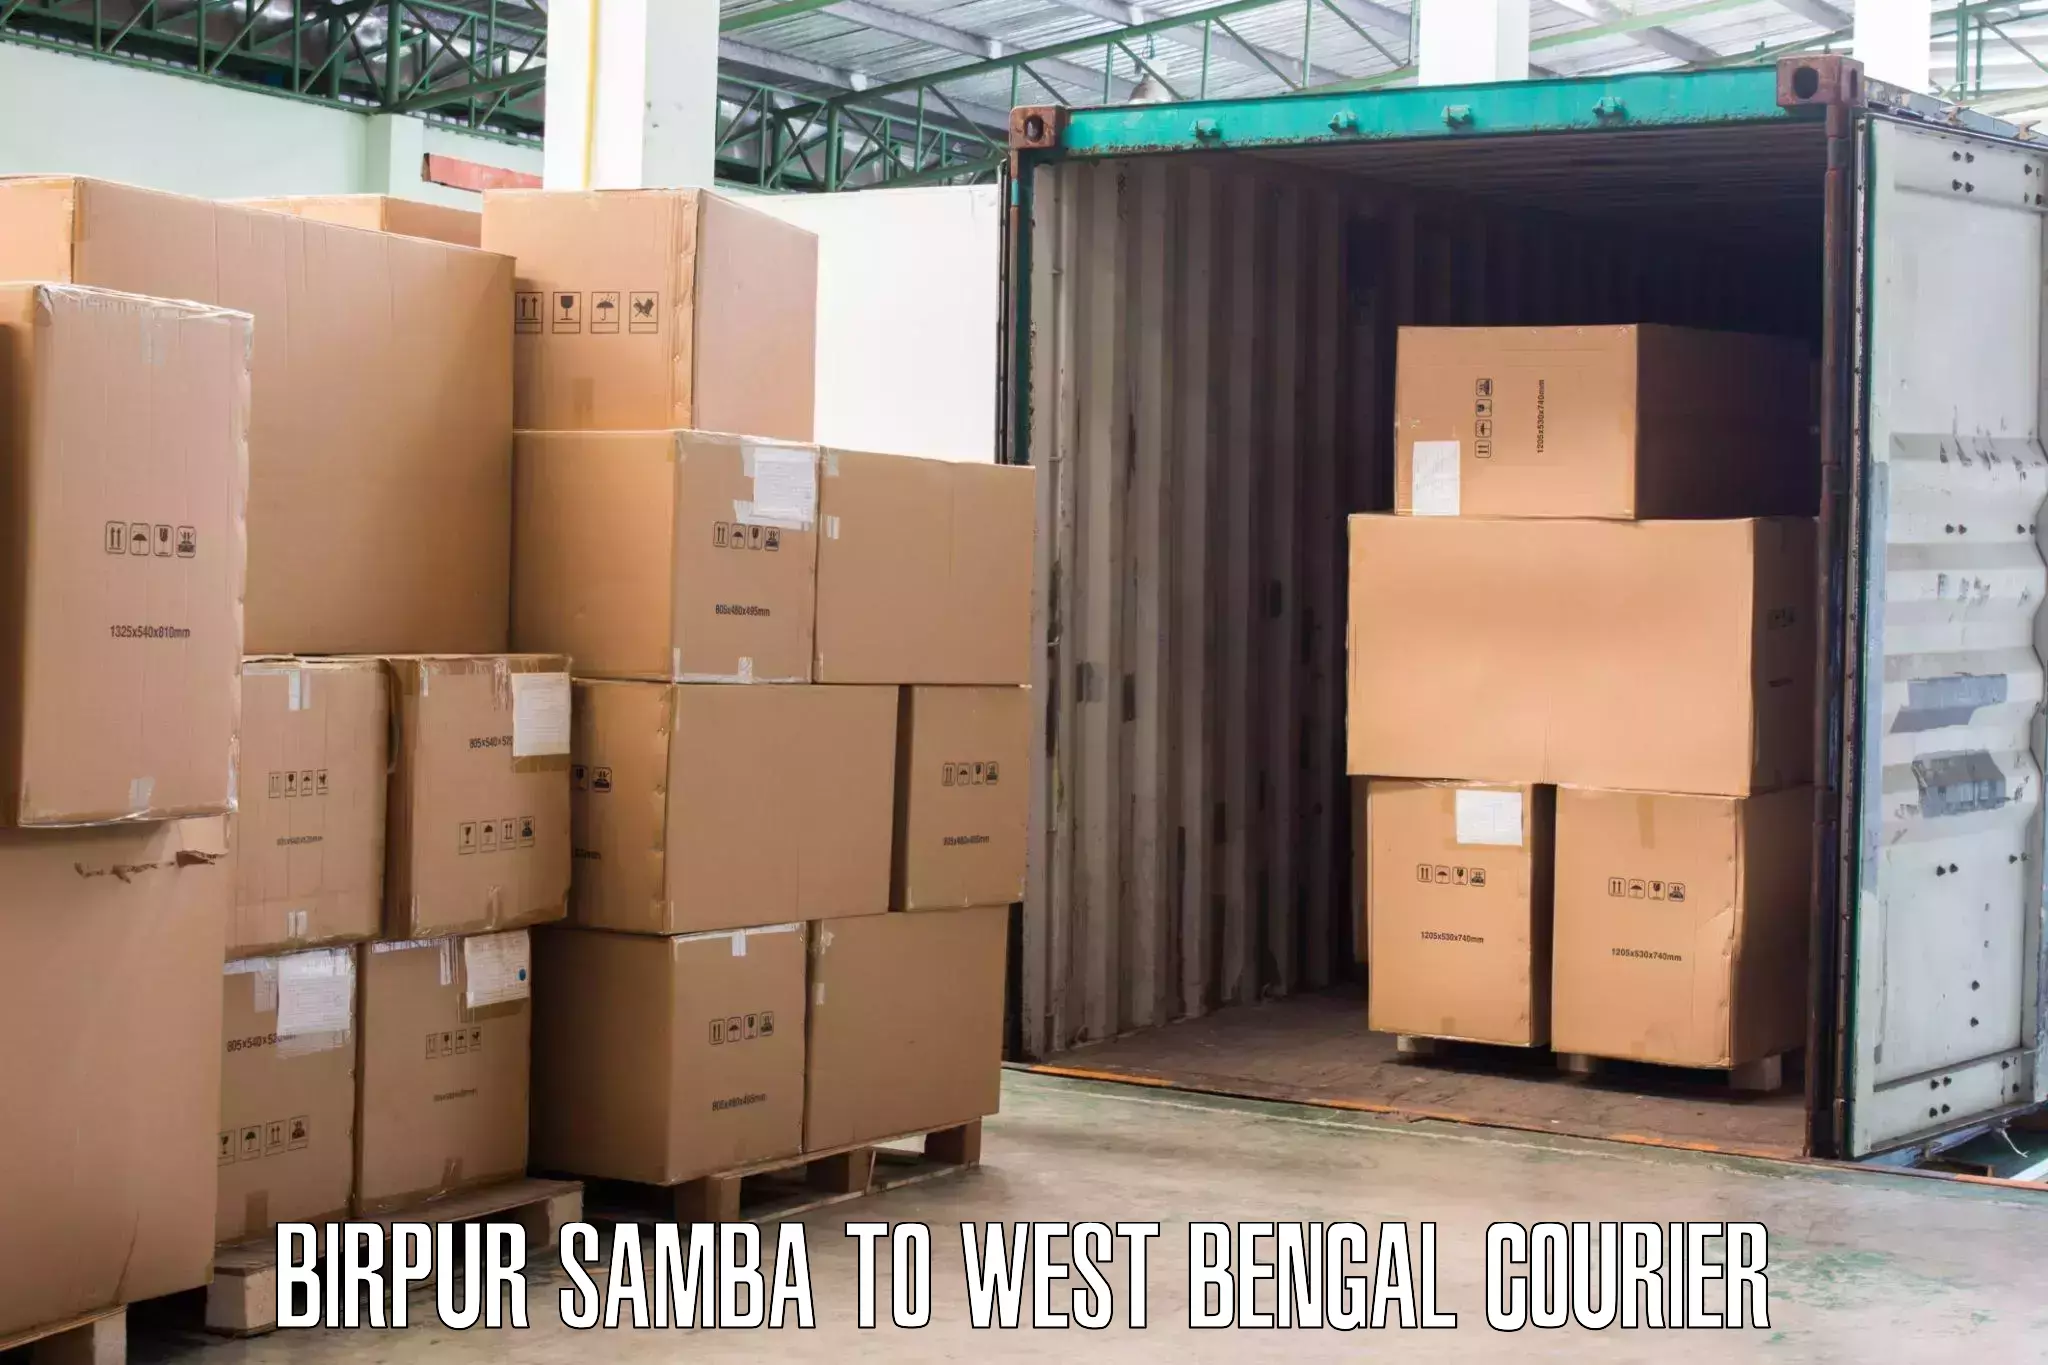 Trusted furniture movers Birpur Samba to West Bengal